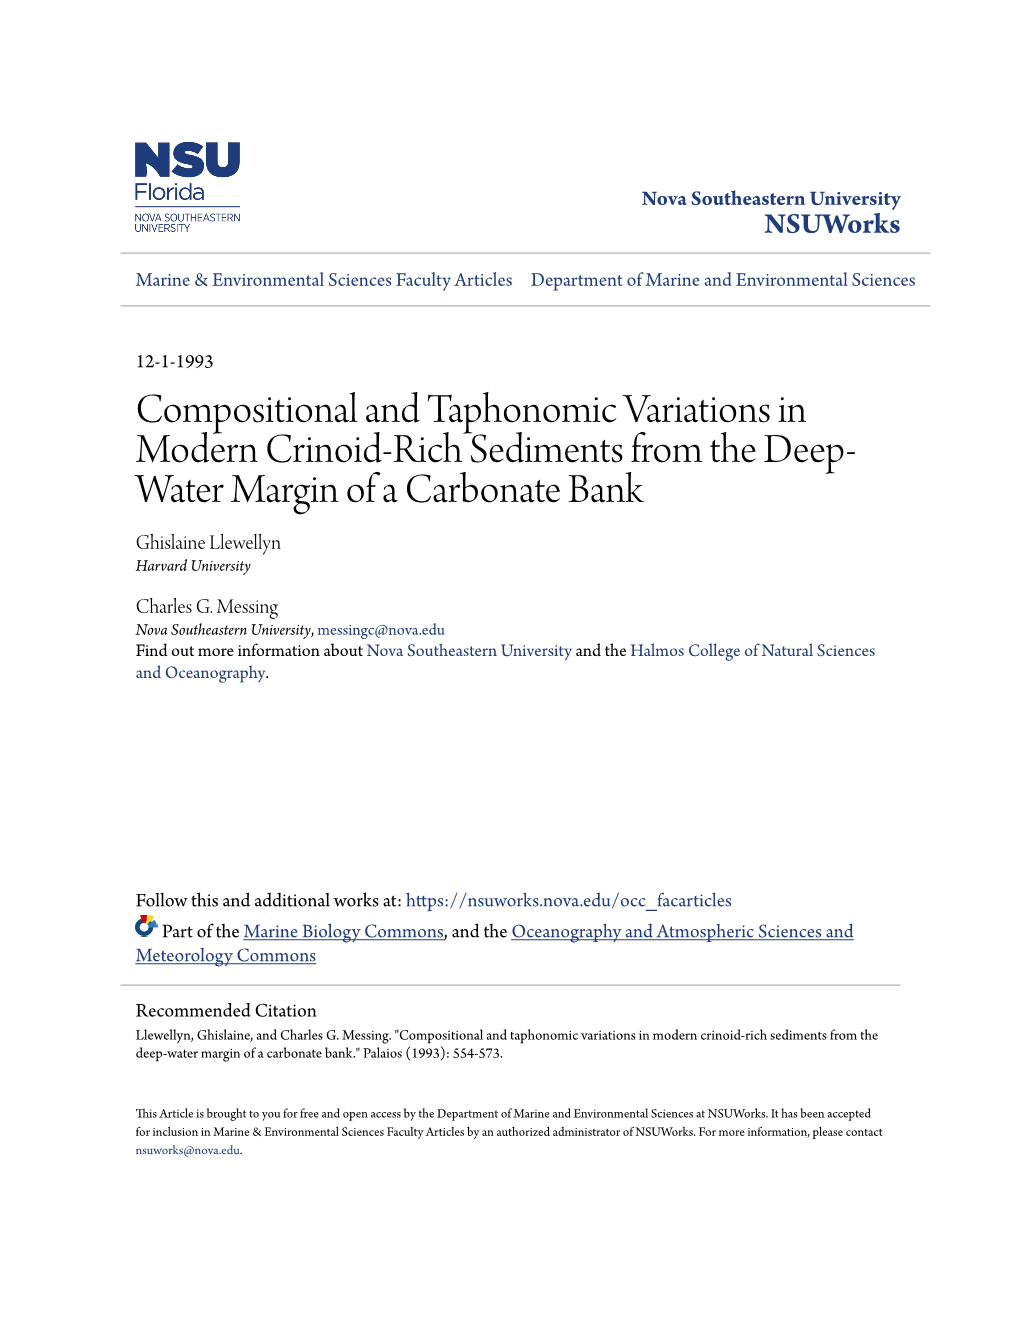 Compositional and Taphonomic Variations in Modern Crinoid-Rich Sediments from the Deep- Water Margin of a Carbonate Bank Ghislaine Llewellyn Harvard University